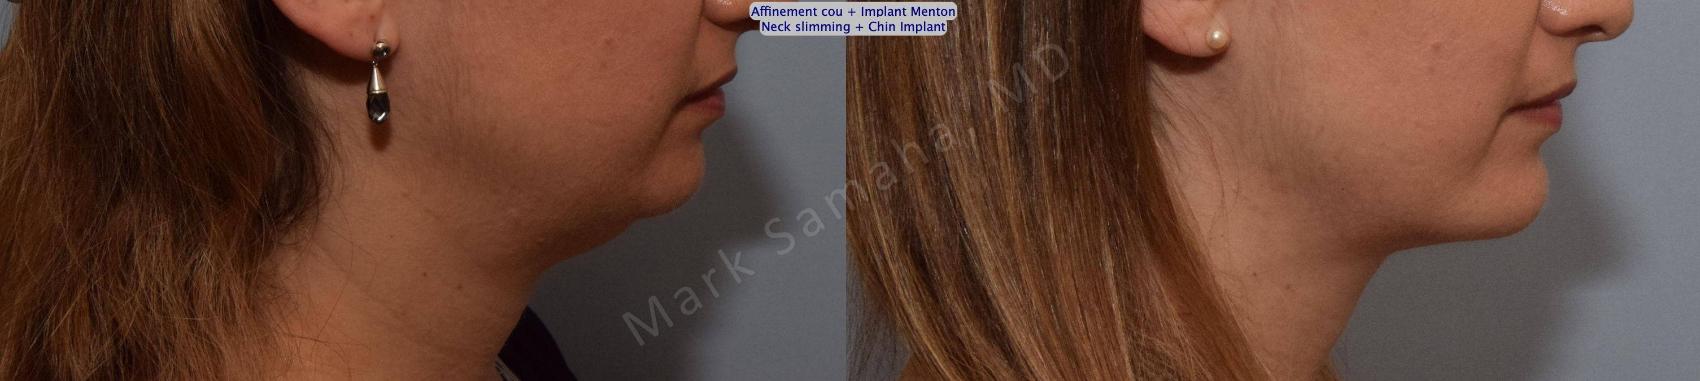 Before & After Chirurgie d'affinement du visage / Face slimming-Face contouring Case 161 Right Side View in Mount Royal, QC